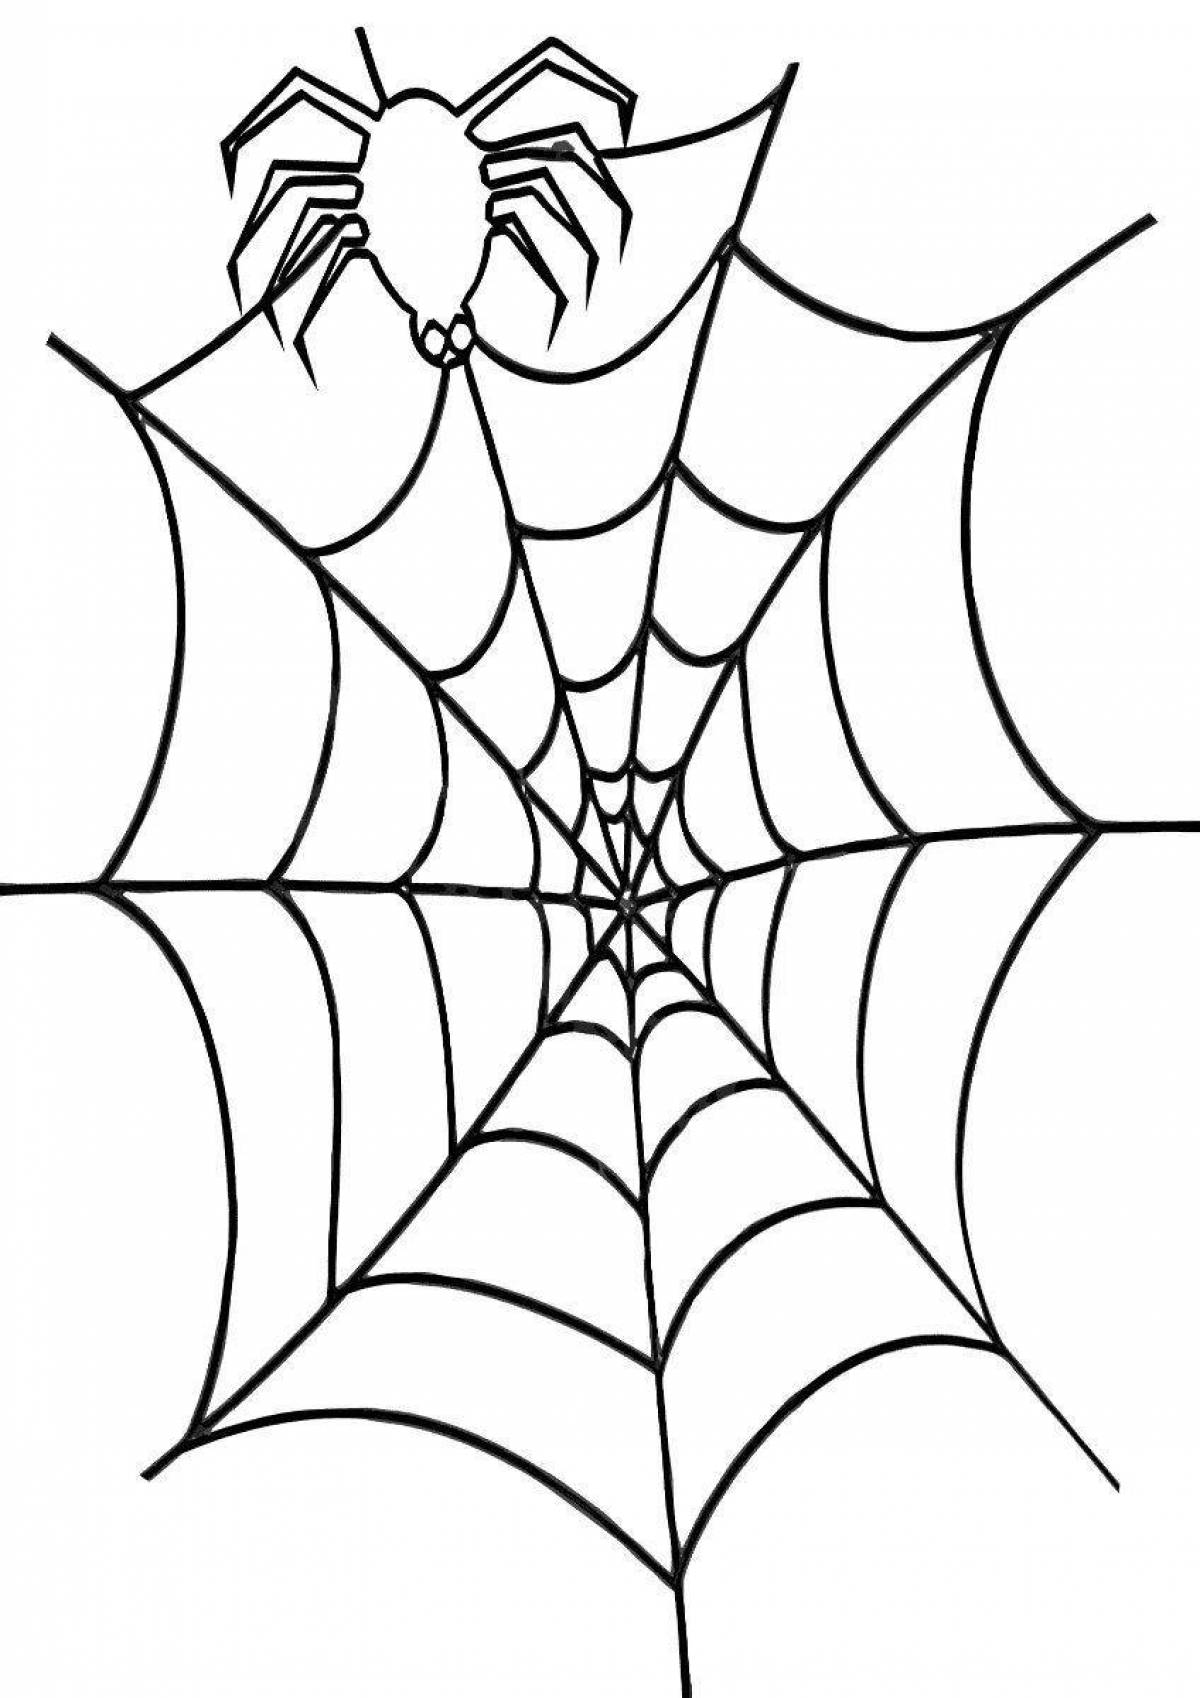 Creative web coloring book for kids